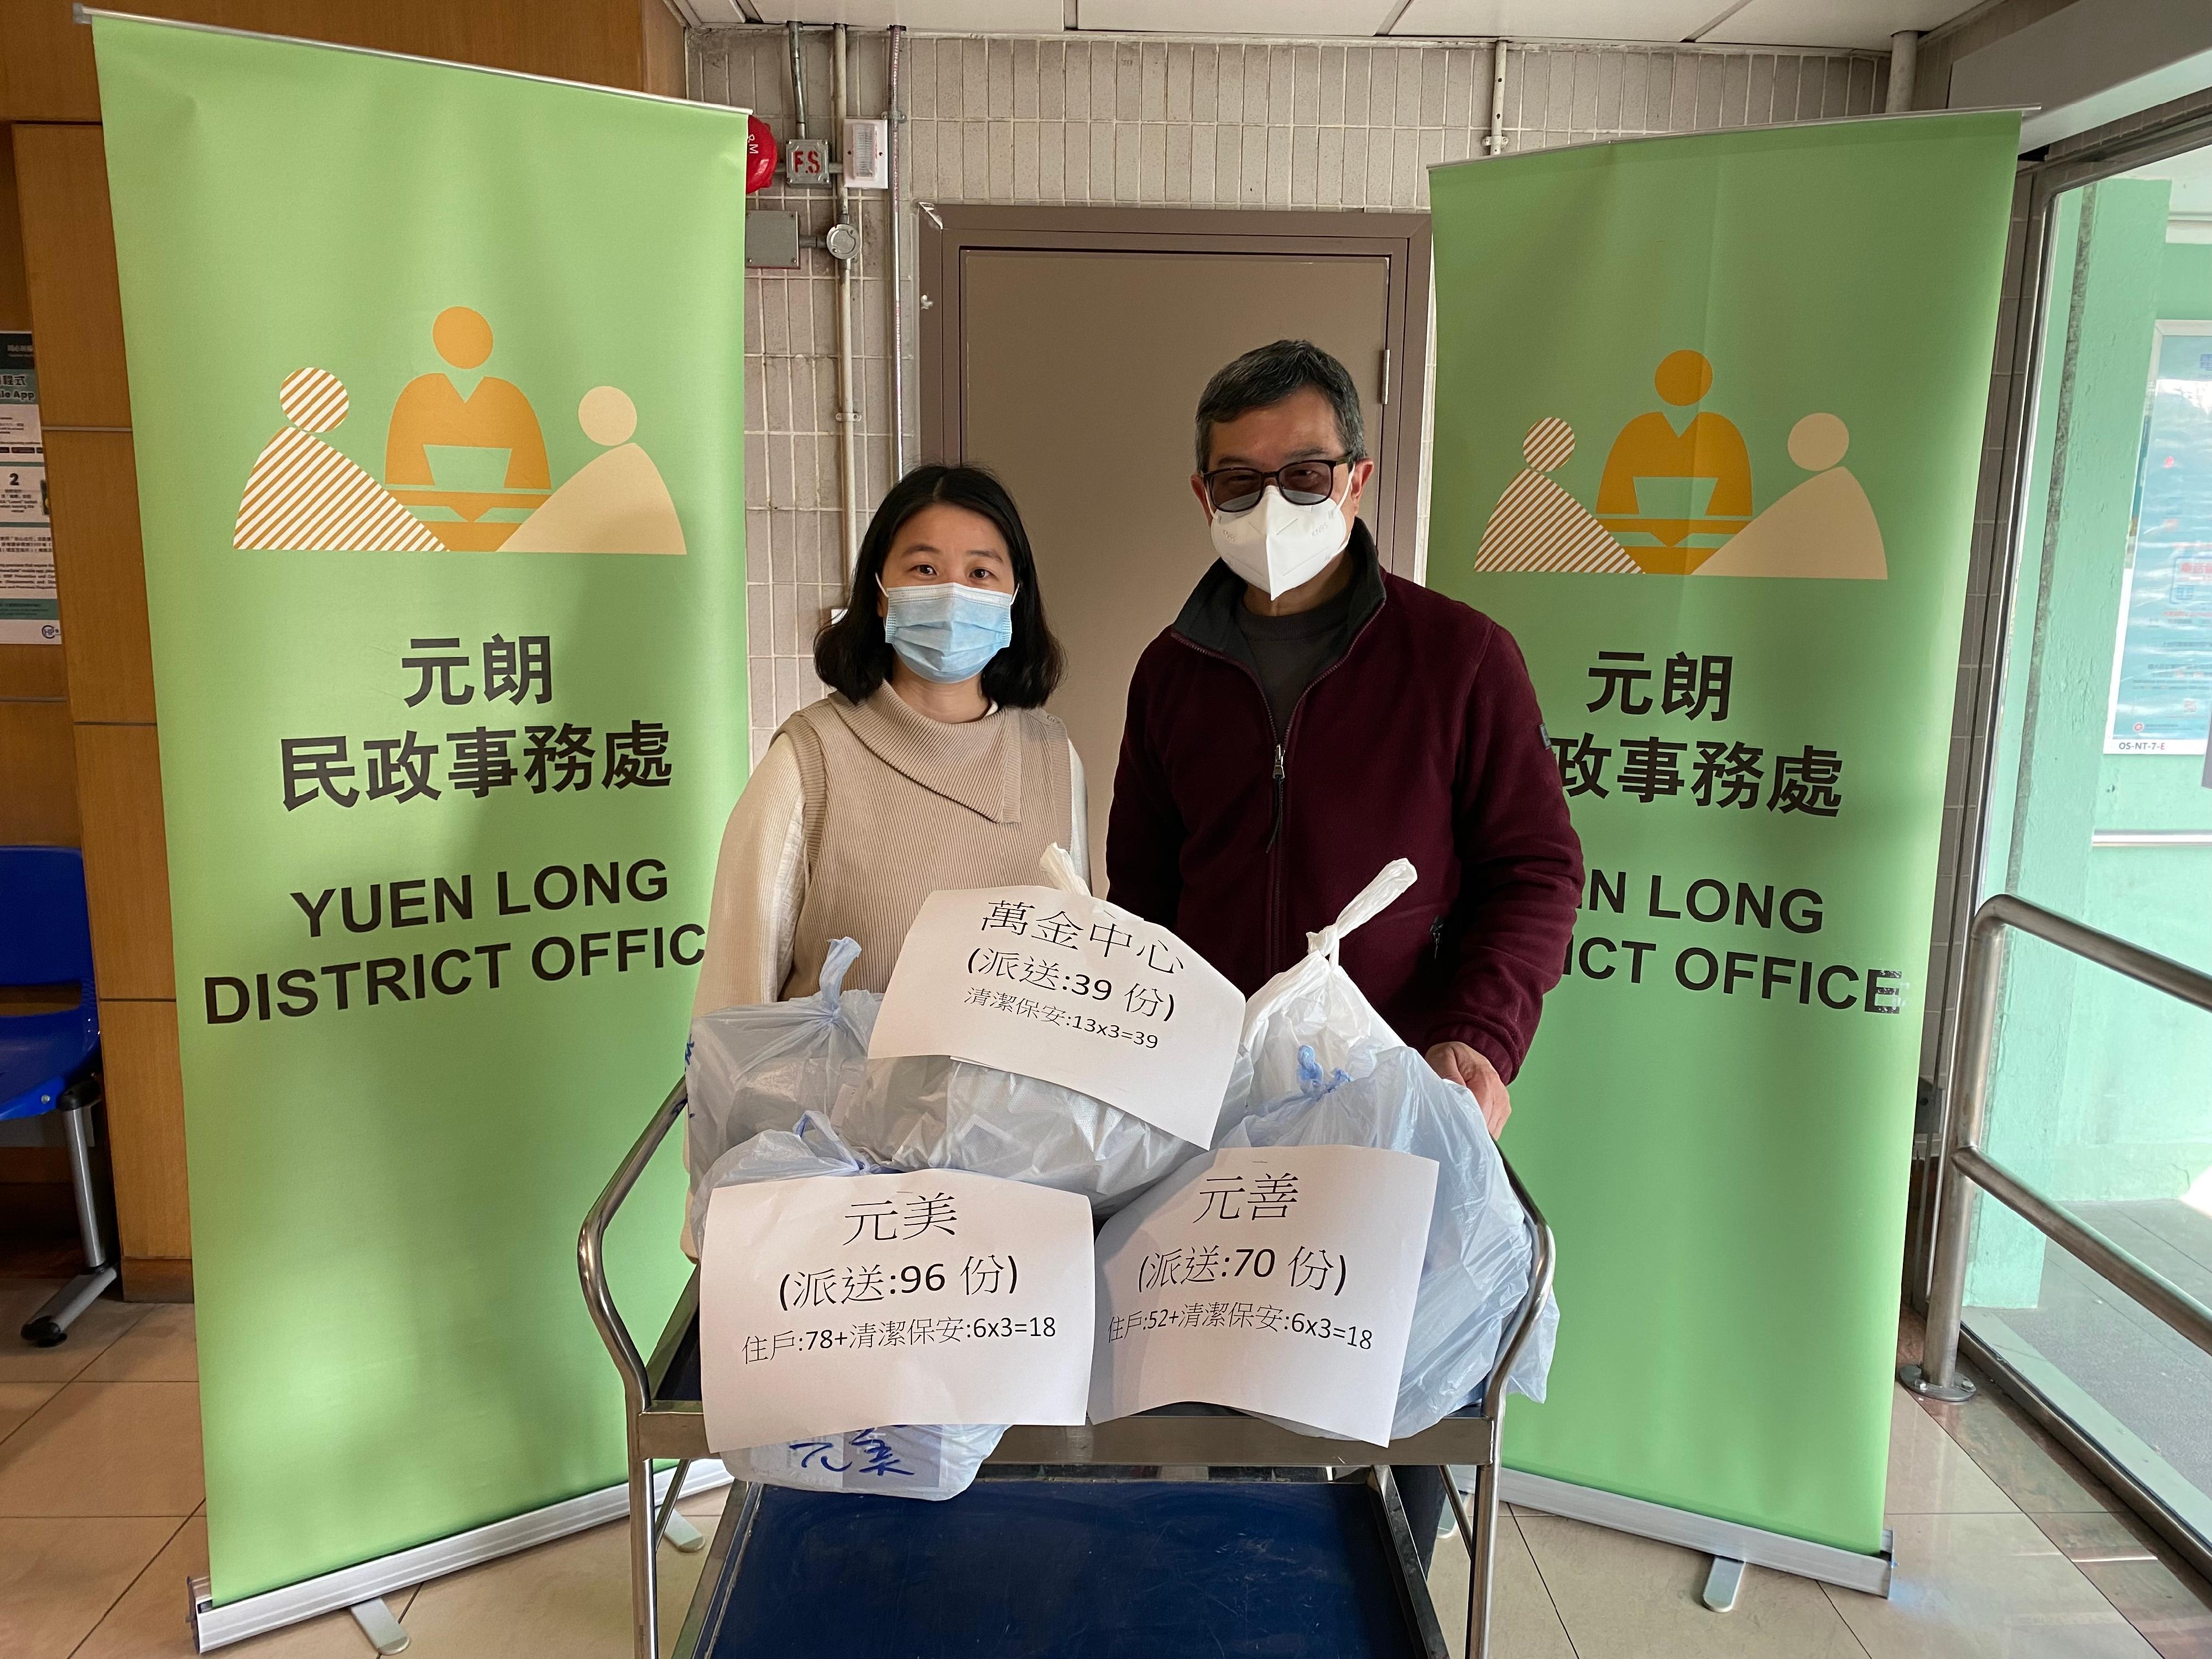 The Yuen Long District Office today (February 24) distributed COVID-19 rapid test kits to households, cleansing workers and property management staff living and working in Far East Consortium Yuen Long Building, Pearl House, Chun Chu House and residential premises around the area, as well as to cleansing workers and property management staff working in Golden Plaza for voluntary testing through the property management companies and district organisations.
